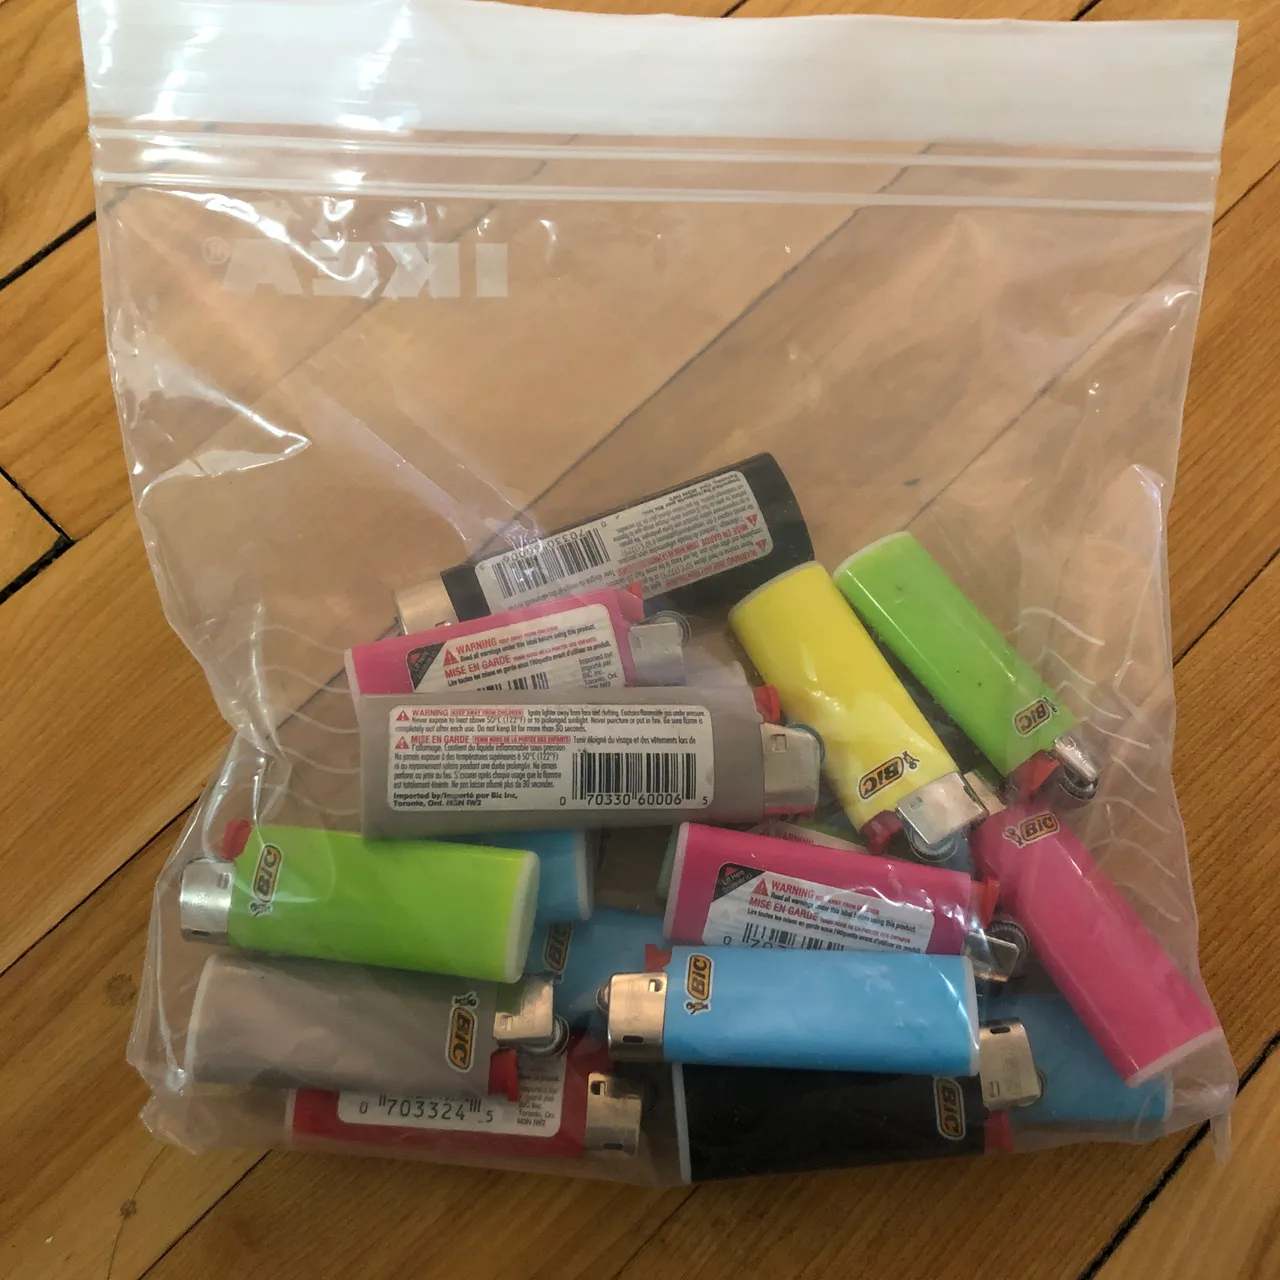 Bag of bic lighters photo 1